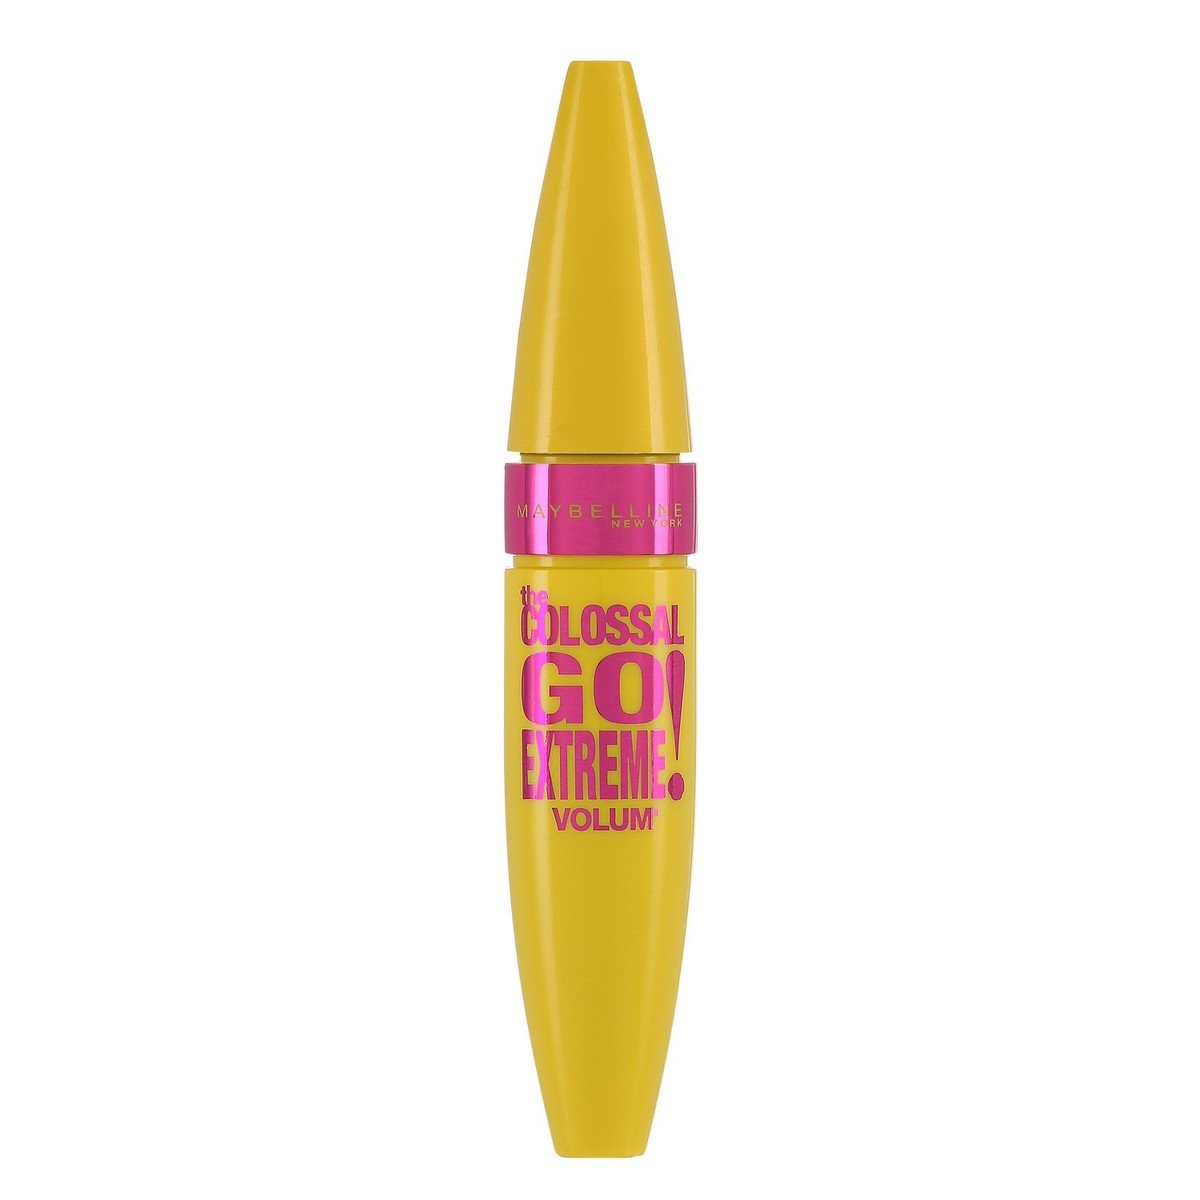 Maybelline Colossal Go Extreme Mascara Very Black 1pc